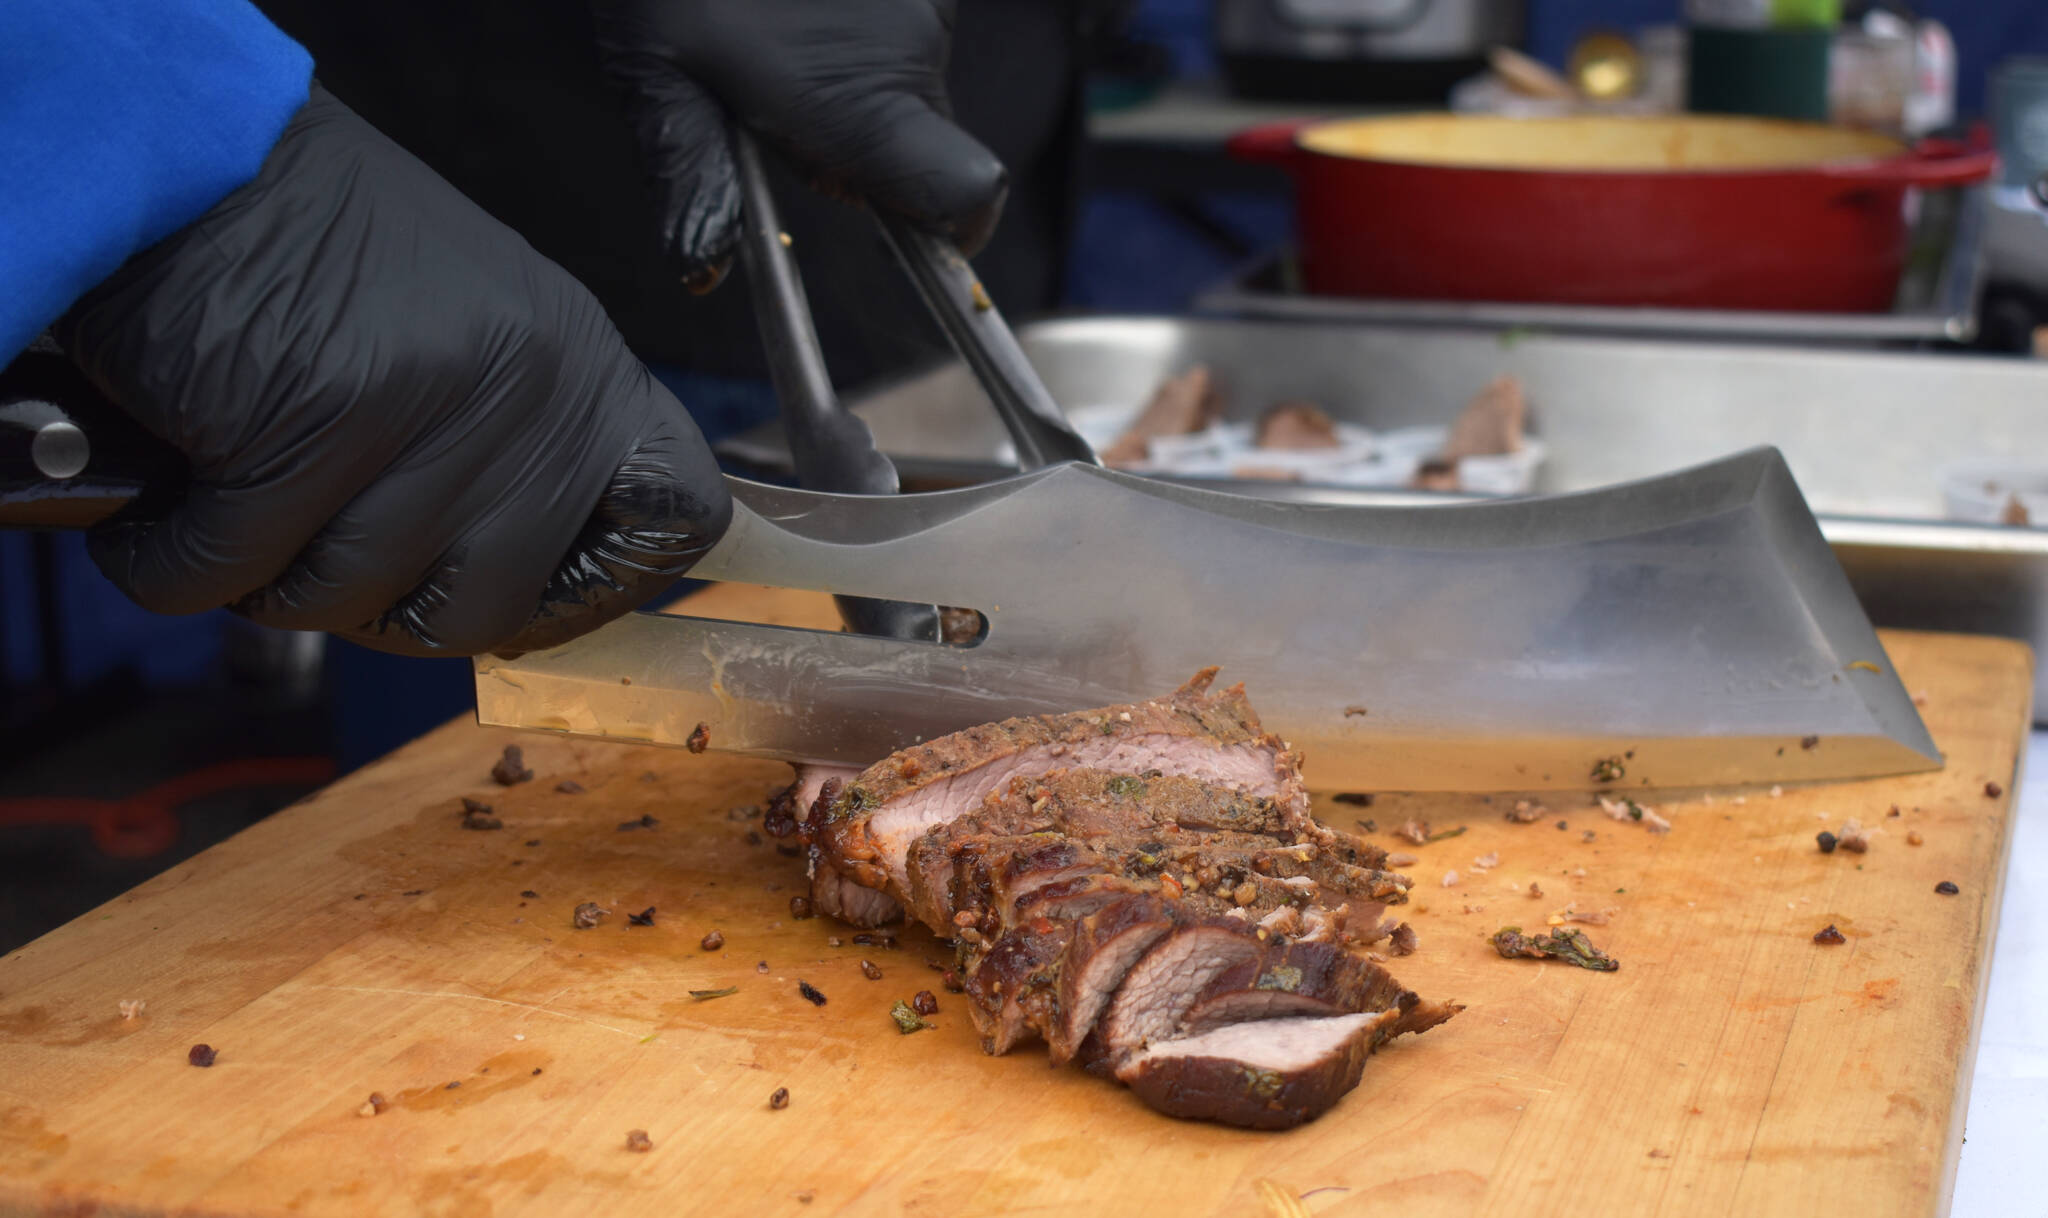 Chef Ron Wisner, of Frontager’s Pizza Co. slices tri tip on his carving board at SummerFest 2022 in Aberdeen.